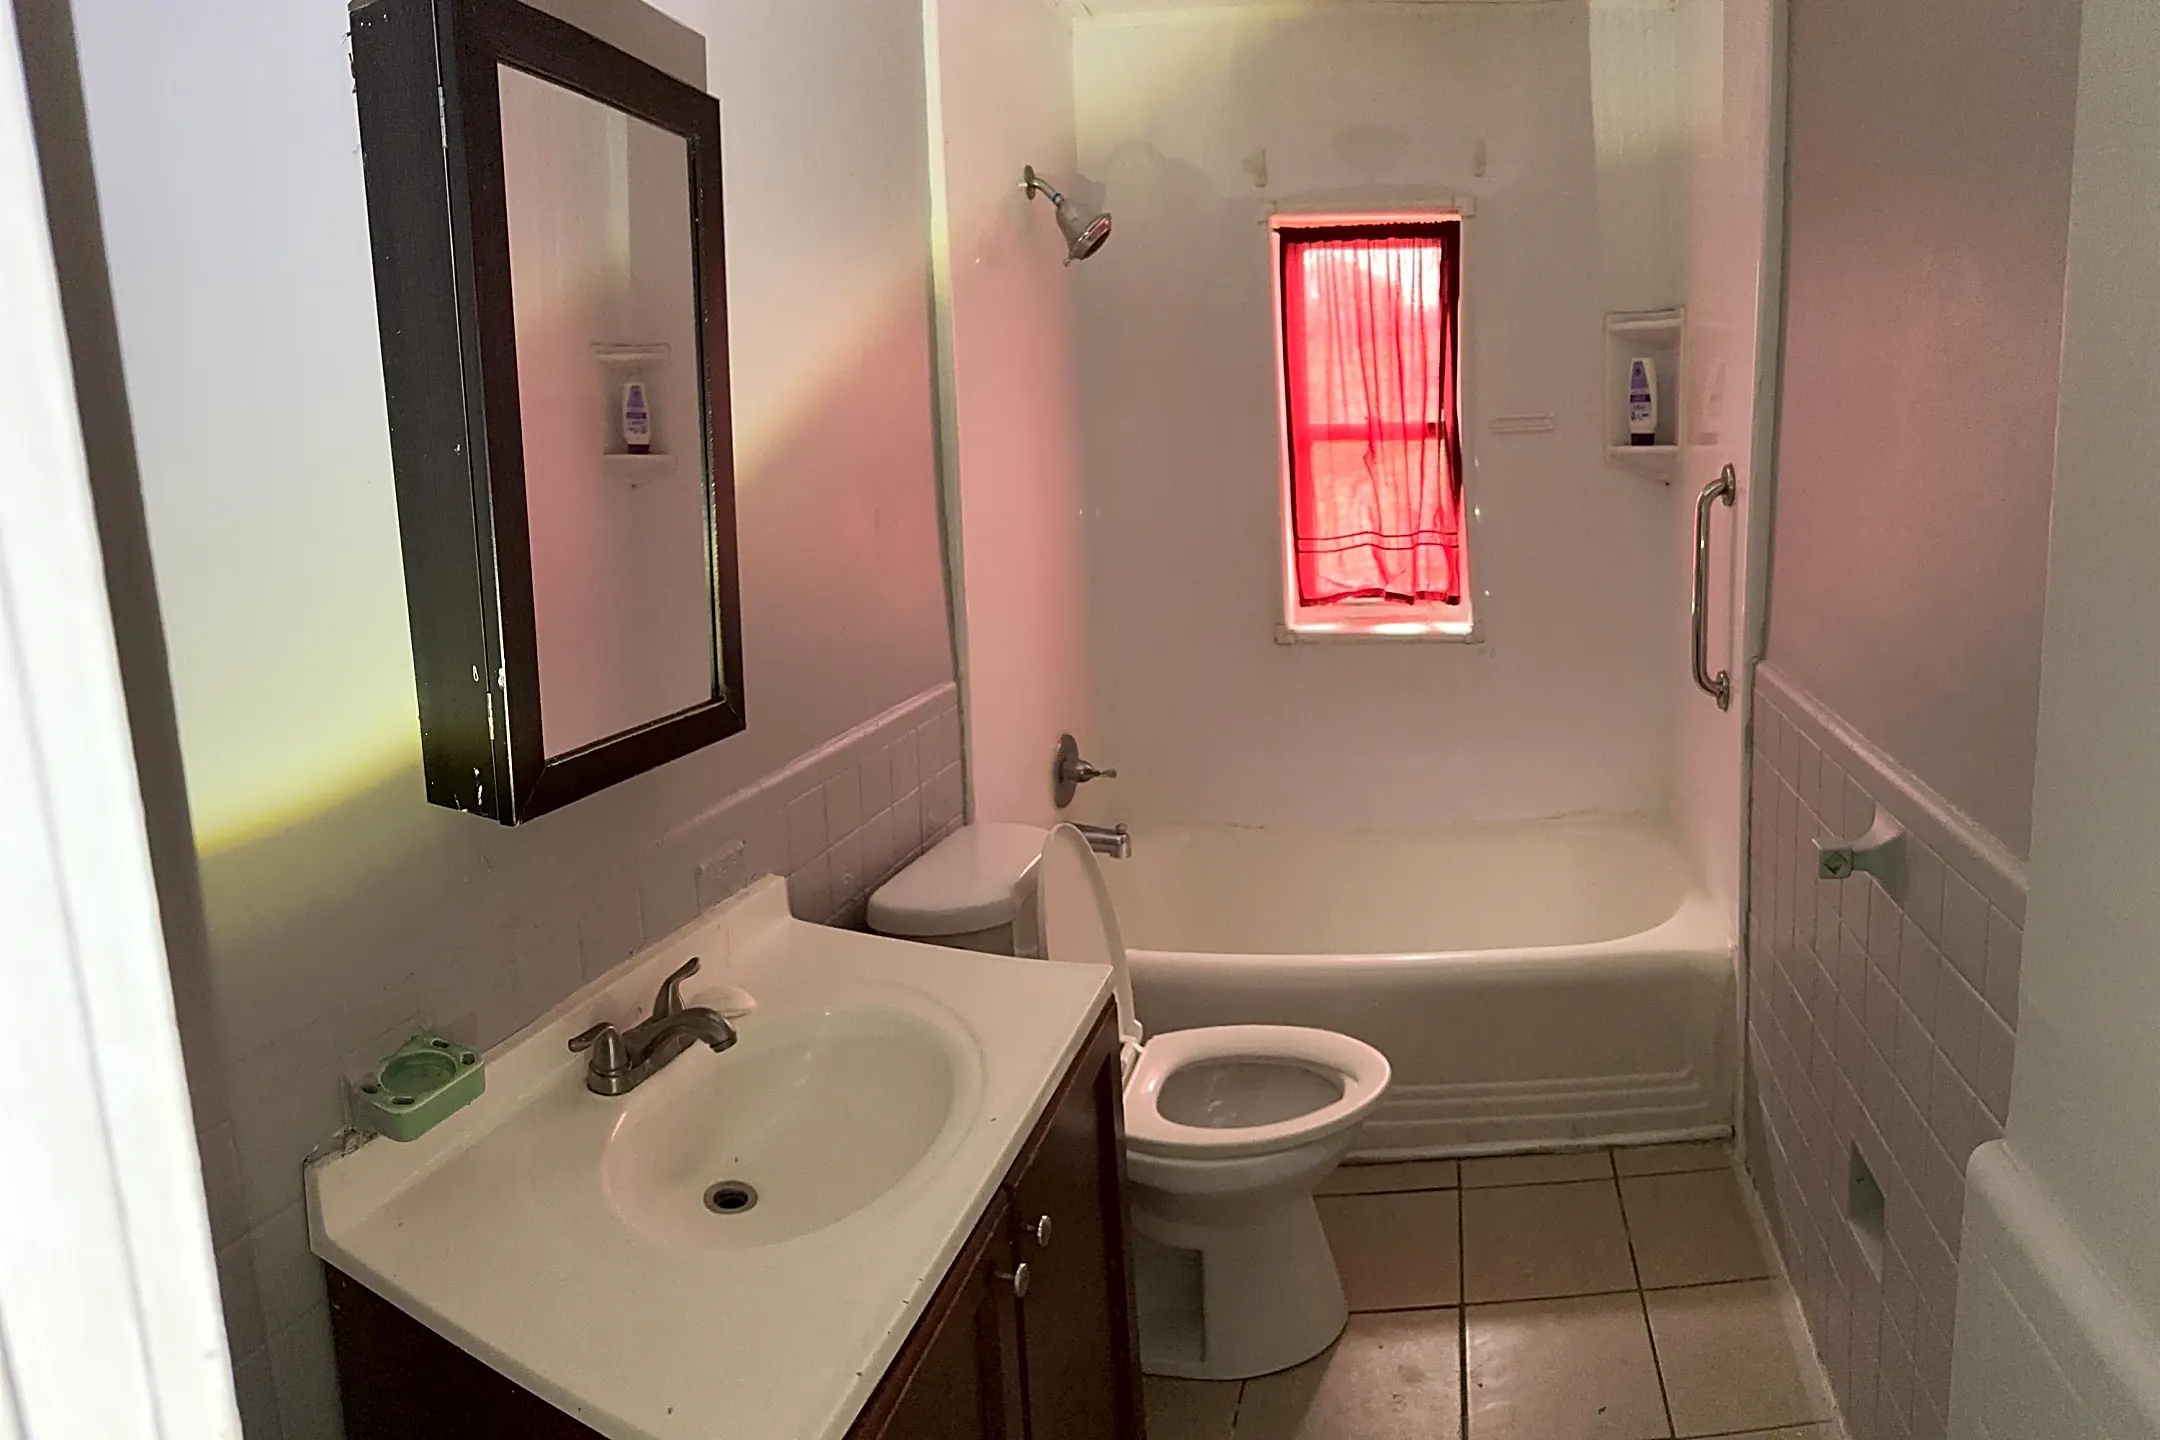 Bathroom - 5025 Chalgrove Ave - Baltimore, MD